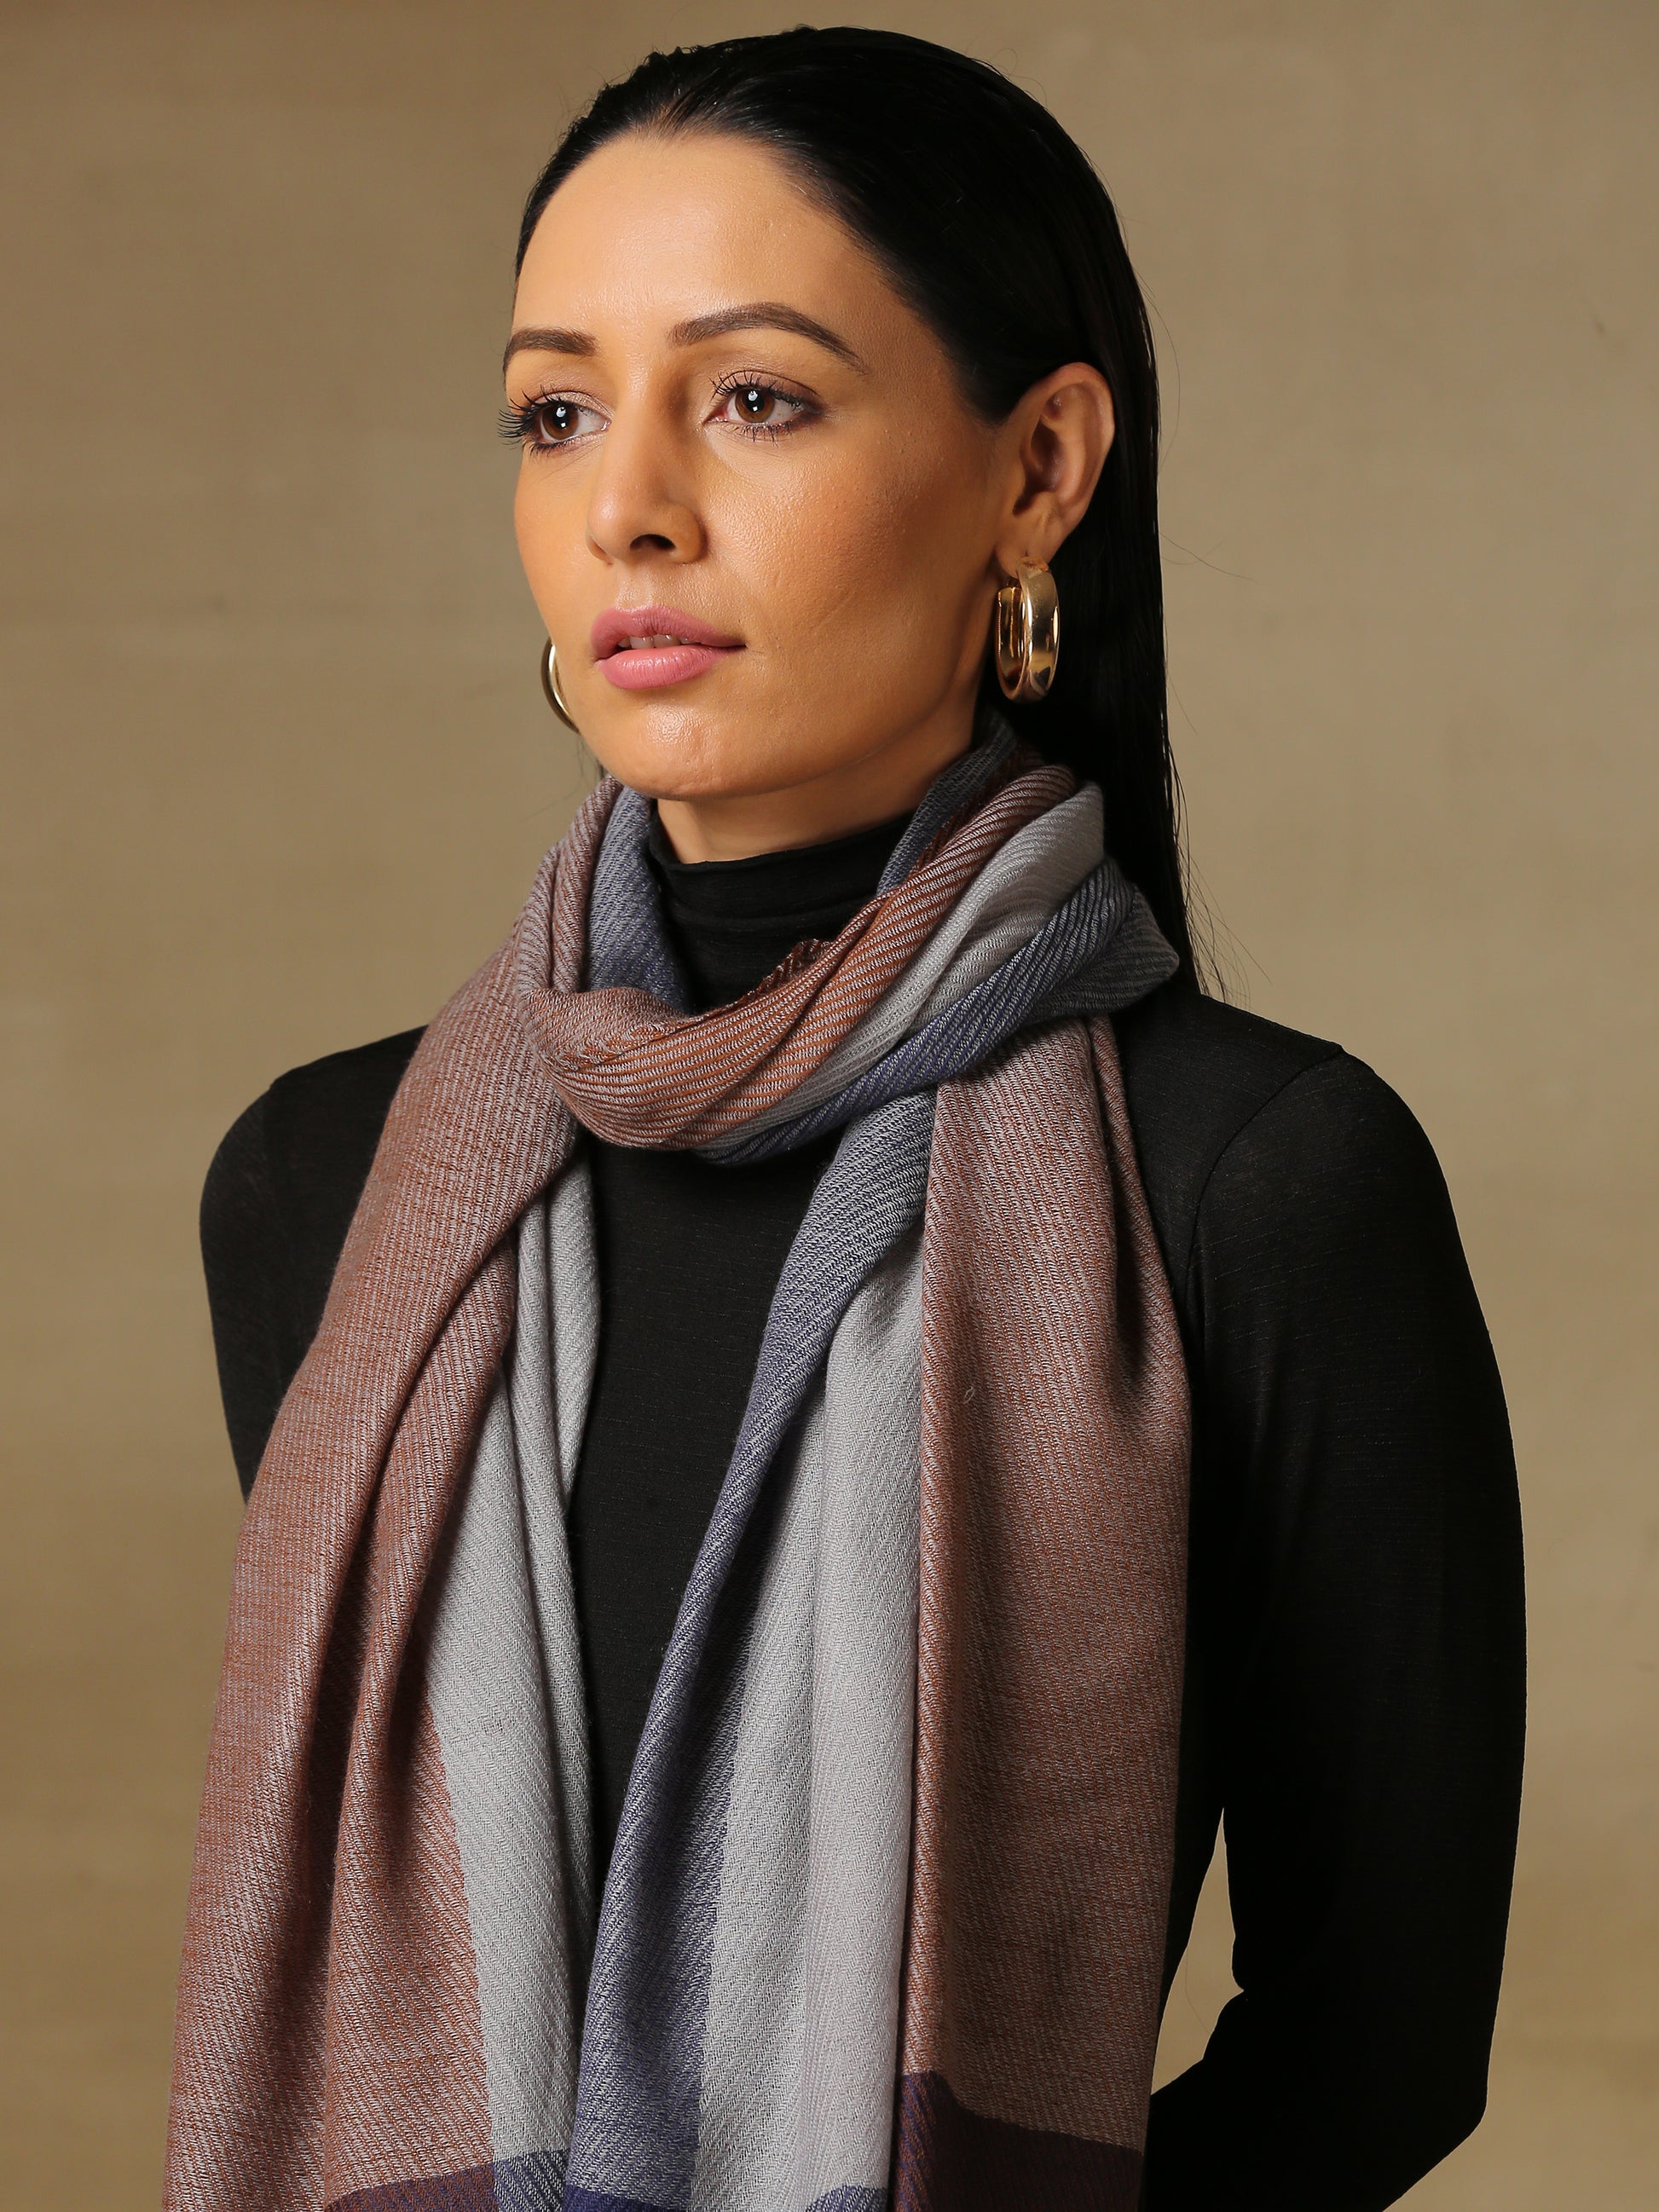 Model is wearing a Pardah stole by Shaza in gray, blue and brown.